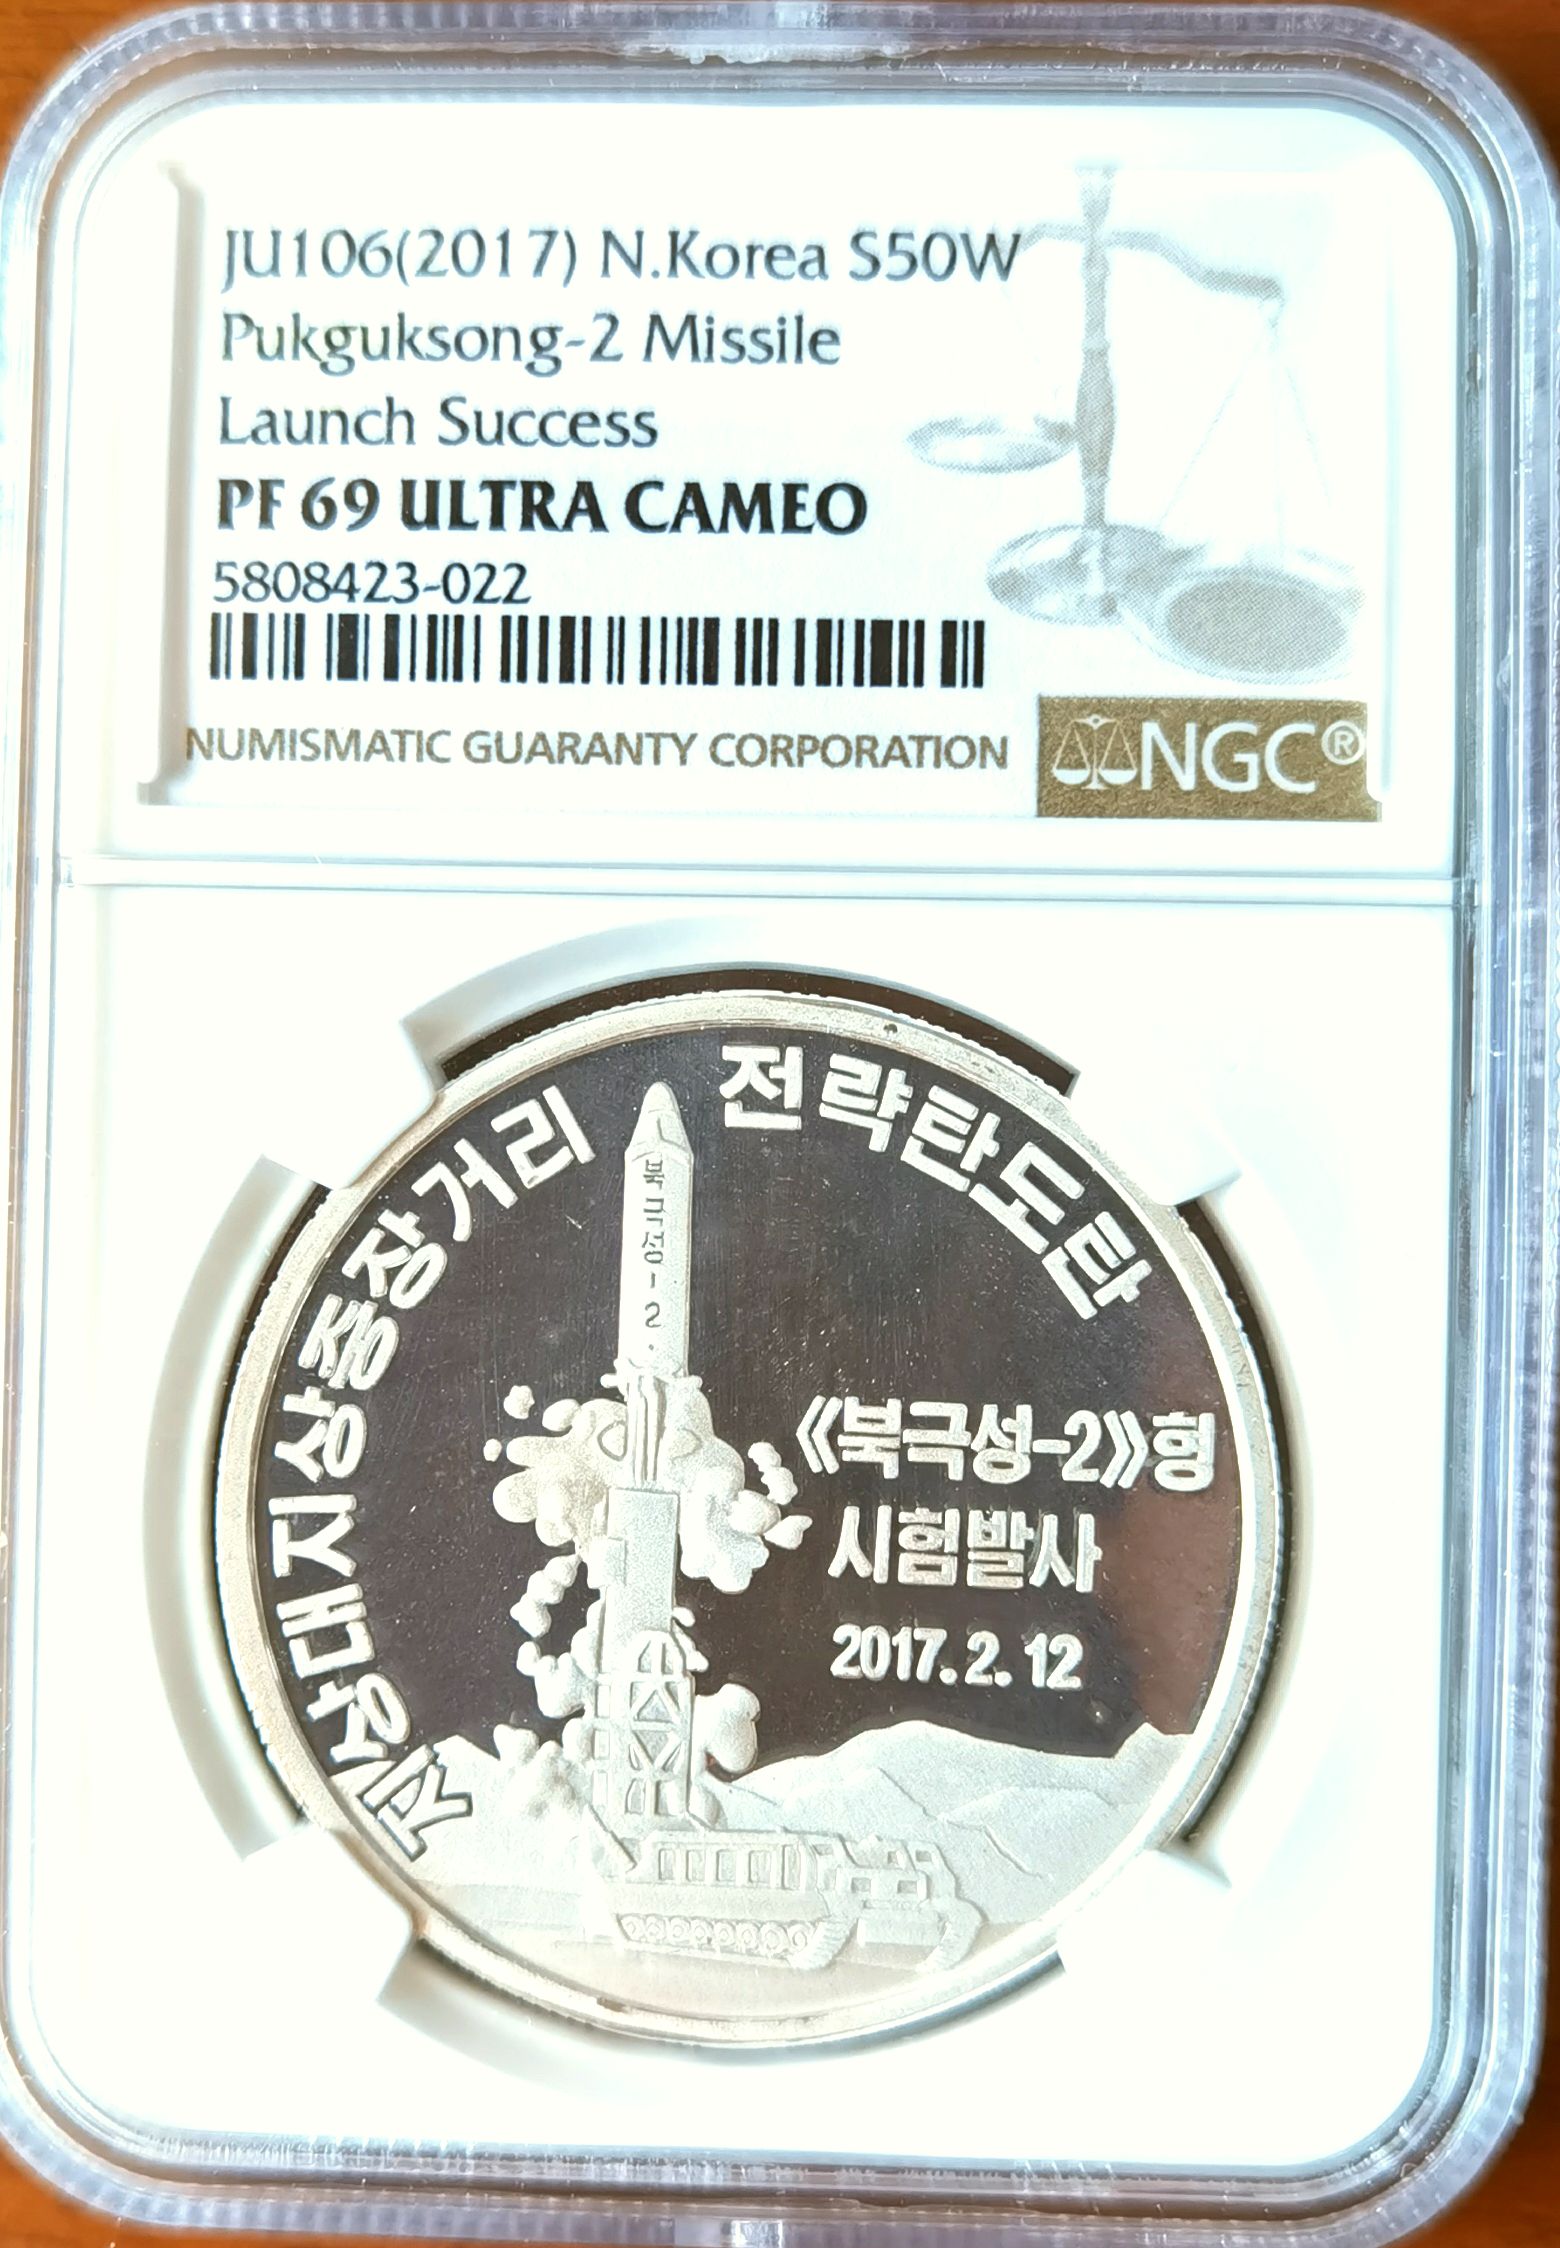 L3463, Korea "Pukguksong-2 Missile Rocket" Silver Coin 1 oz. 2017, NGC PF69